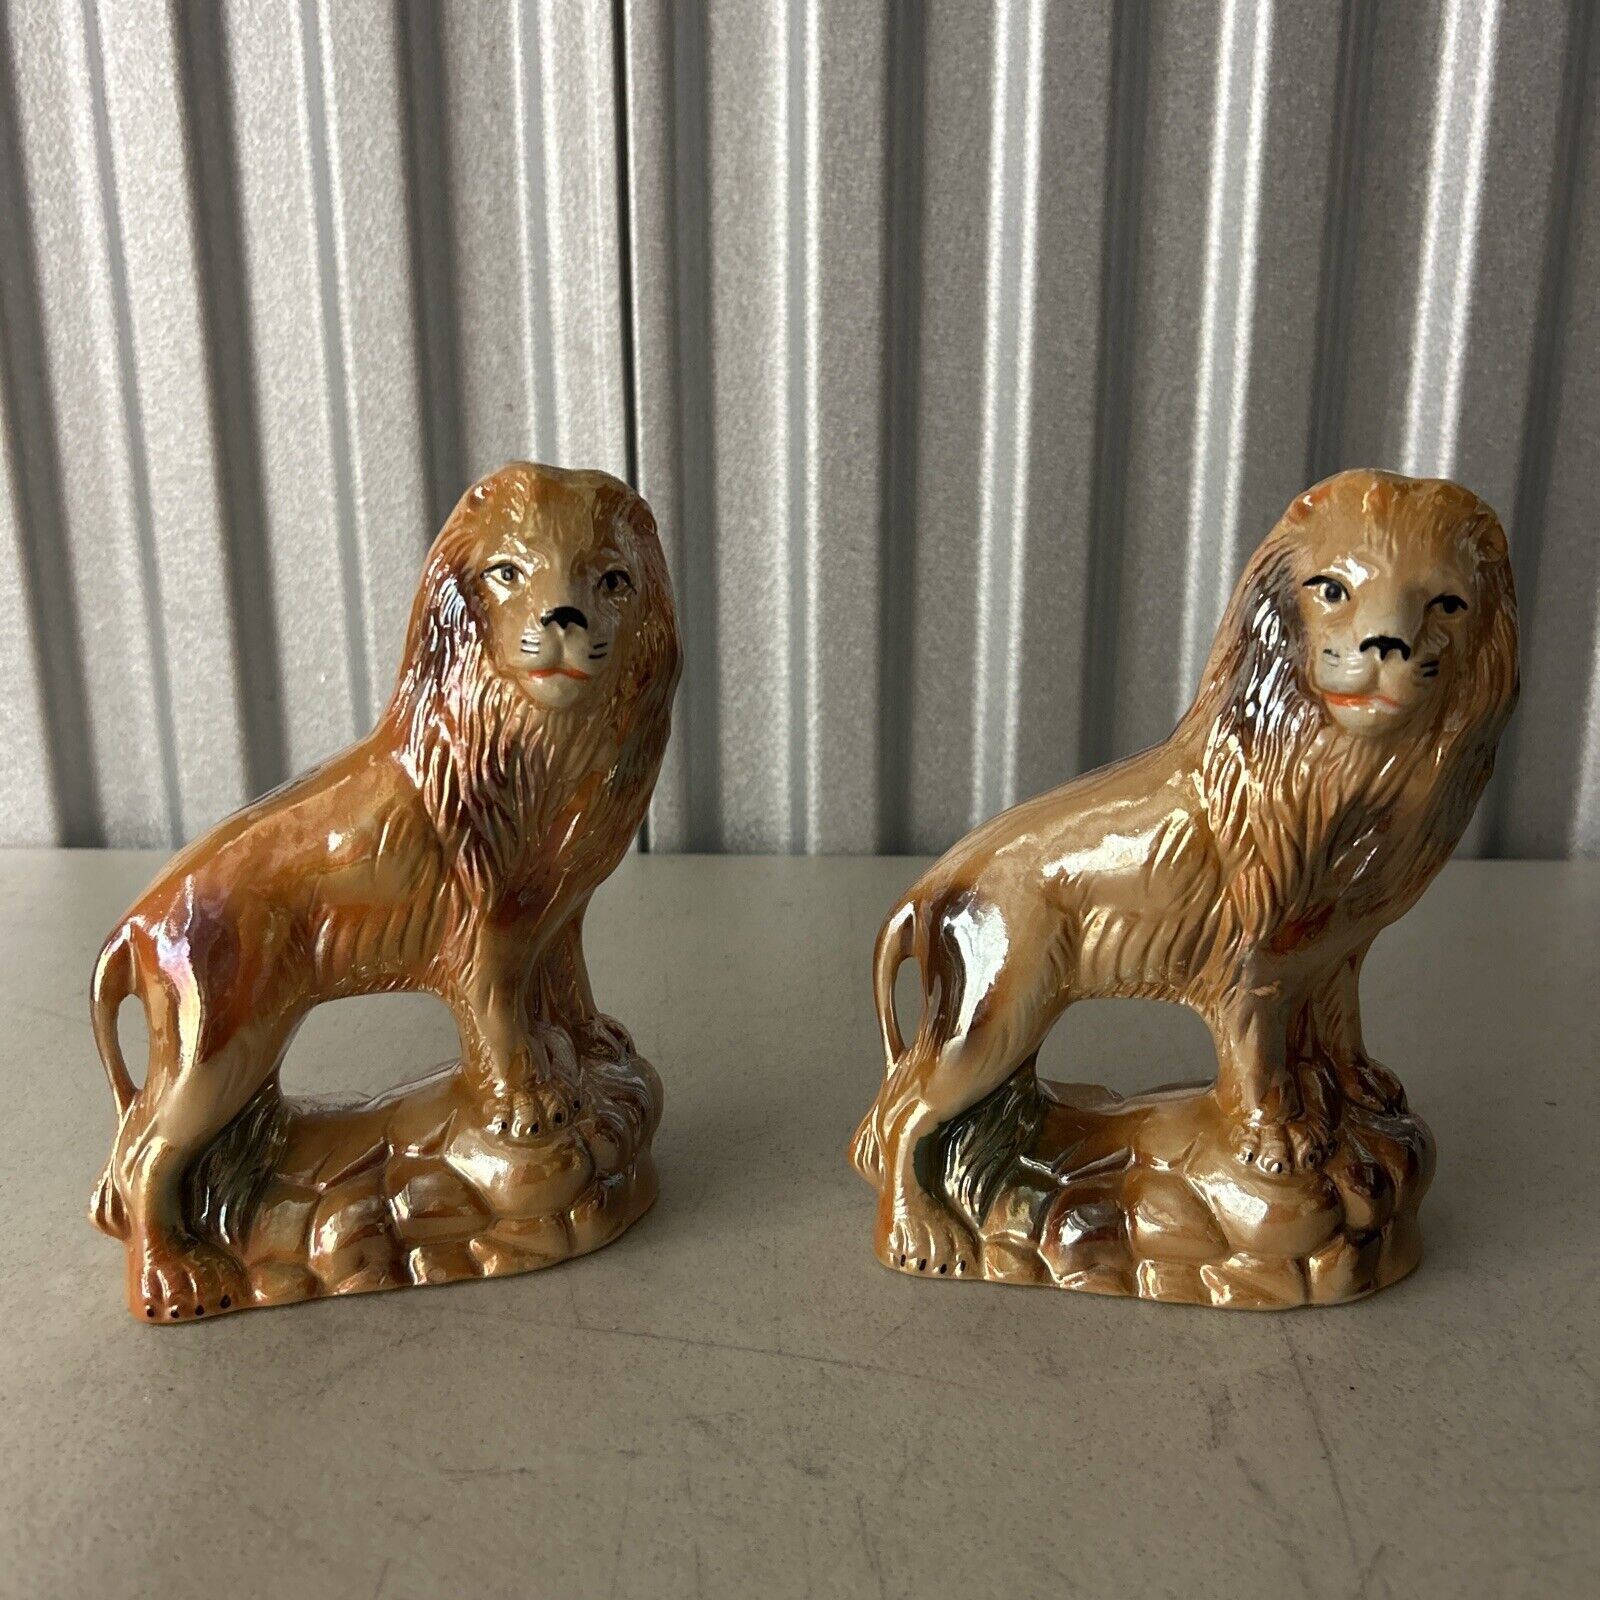 Vintage Pair Of Lion Ceramic Figurines Palm Beach Chic Hollywood Regency 8” Tall